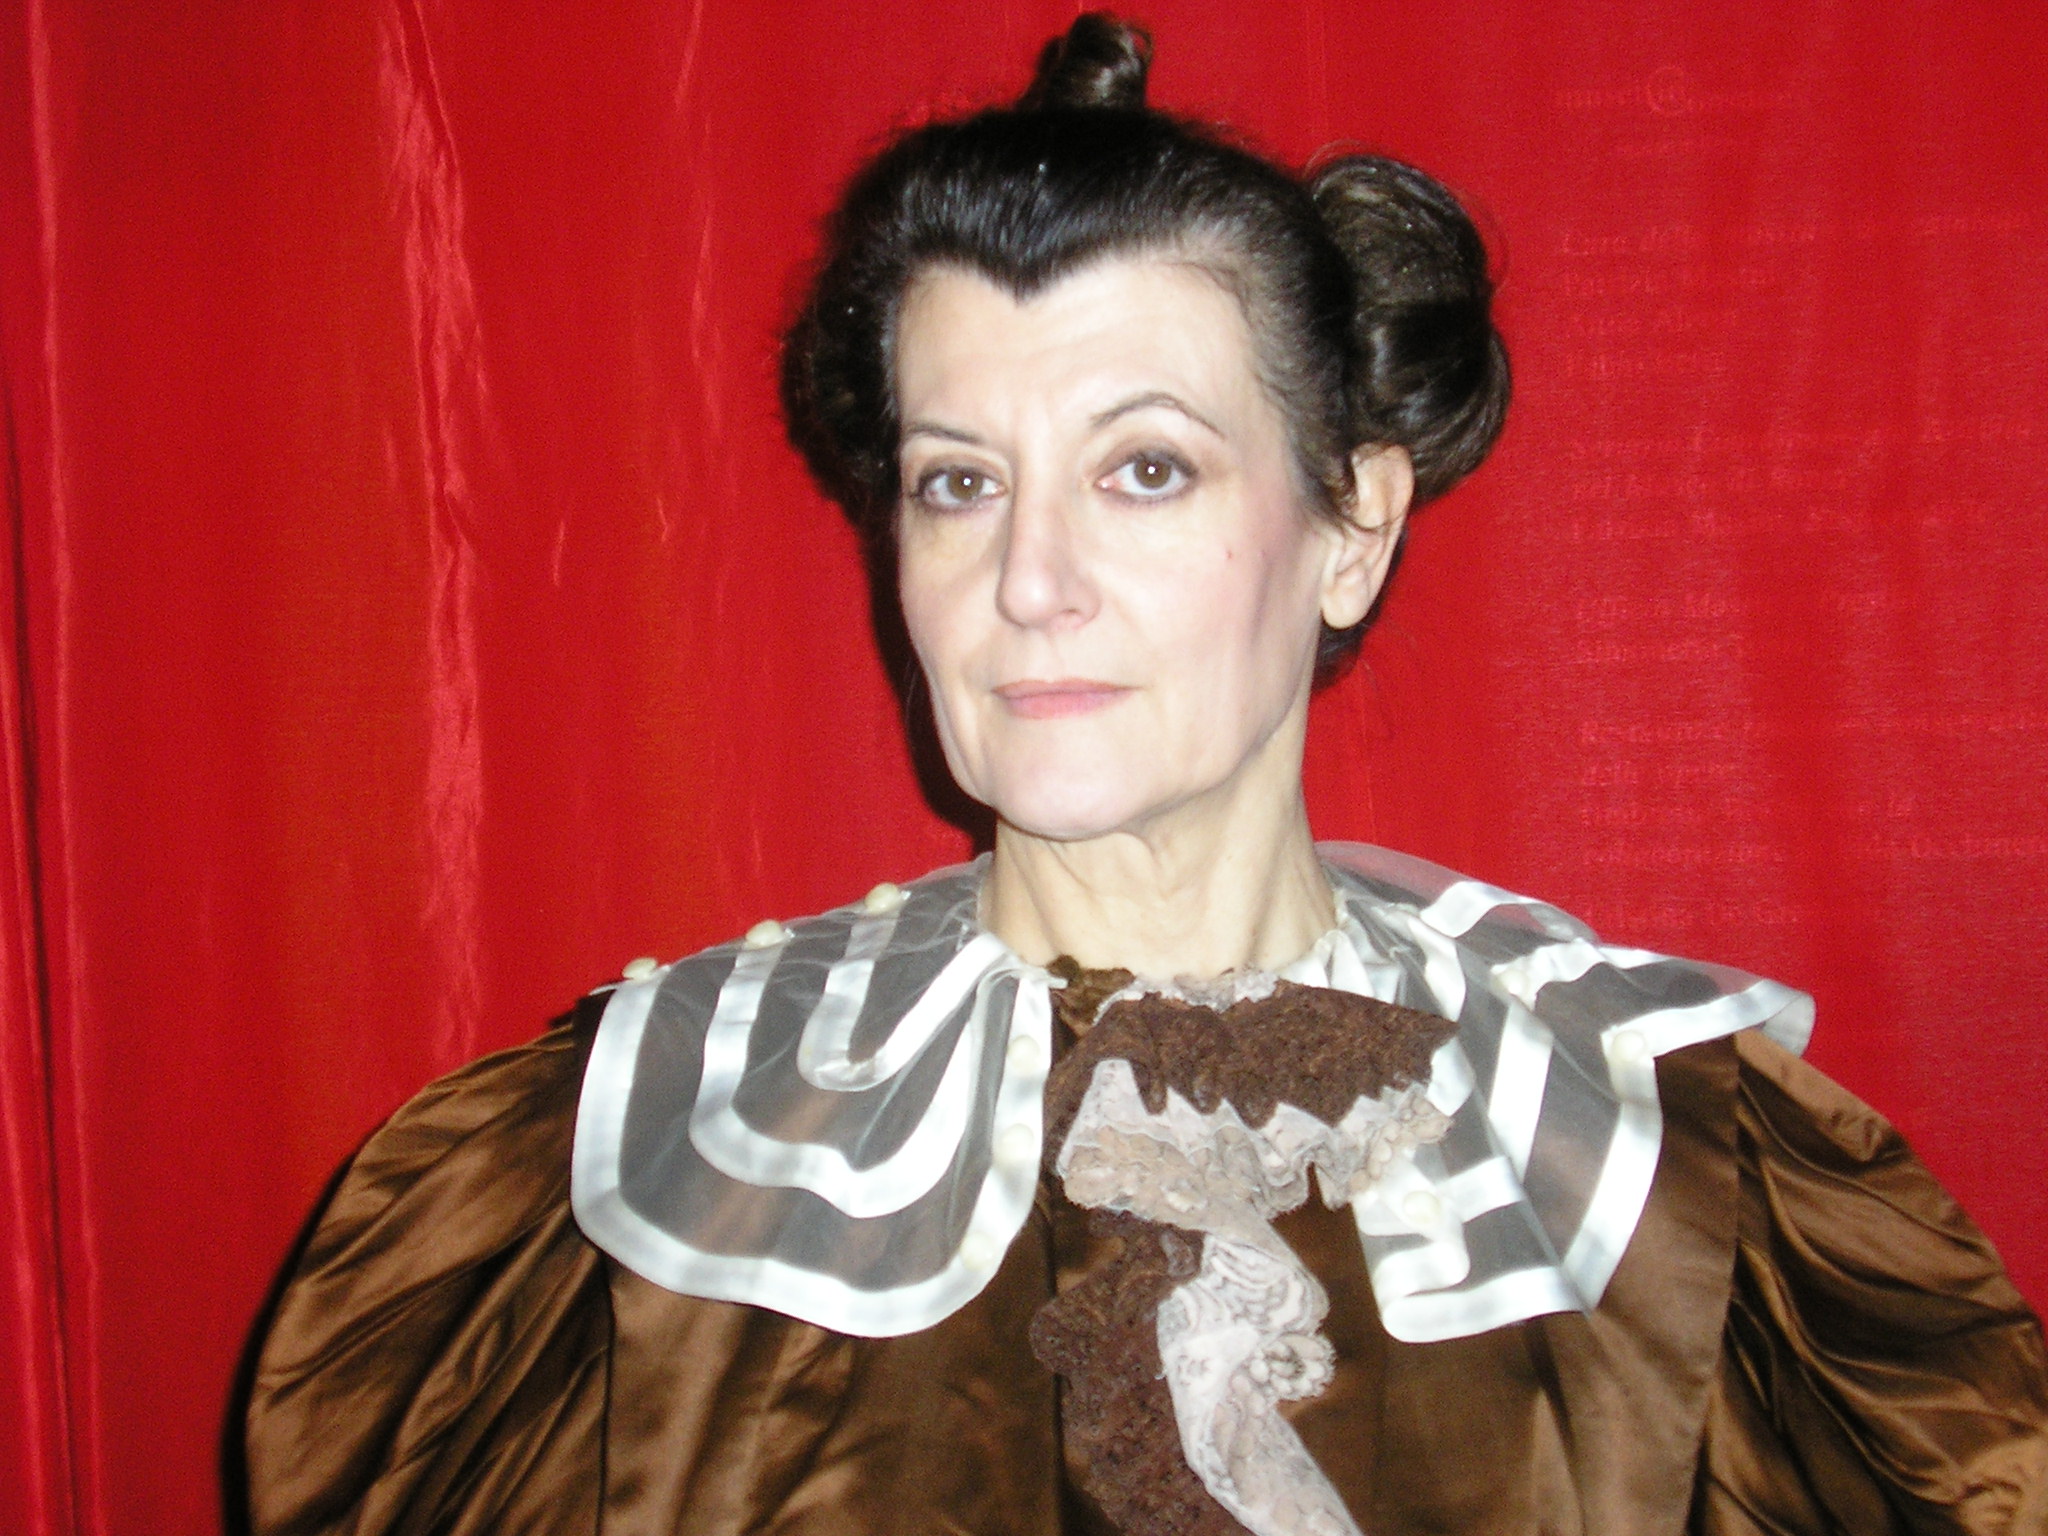 As countess Caracci, Rome, 2008, itinerant show within Palazzo Braschi